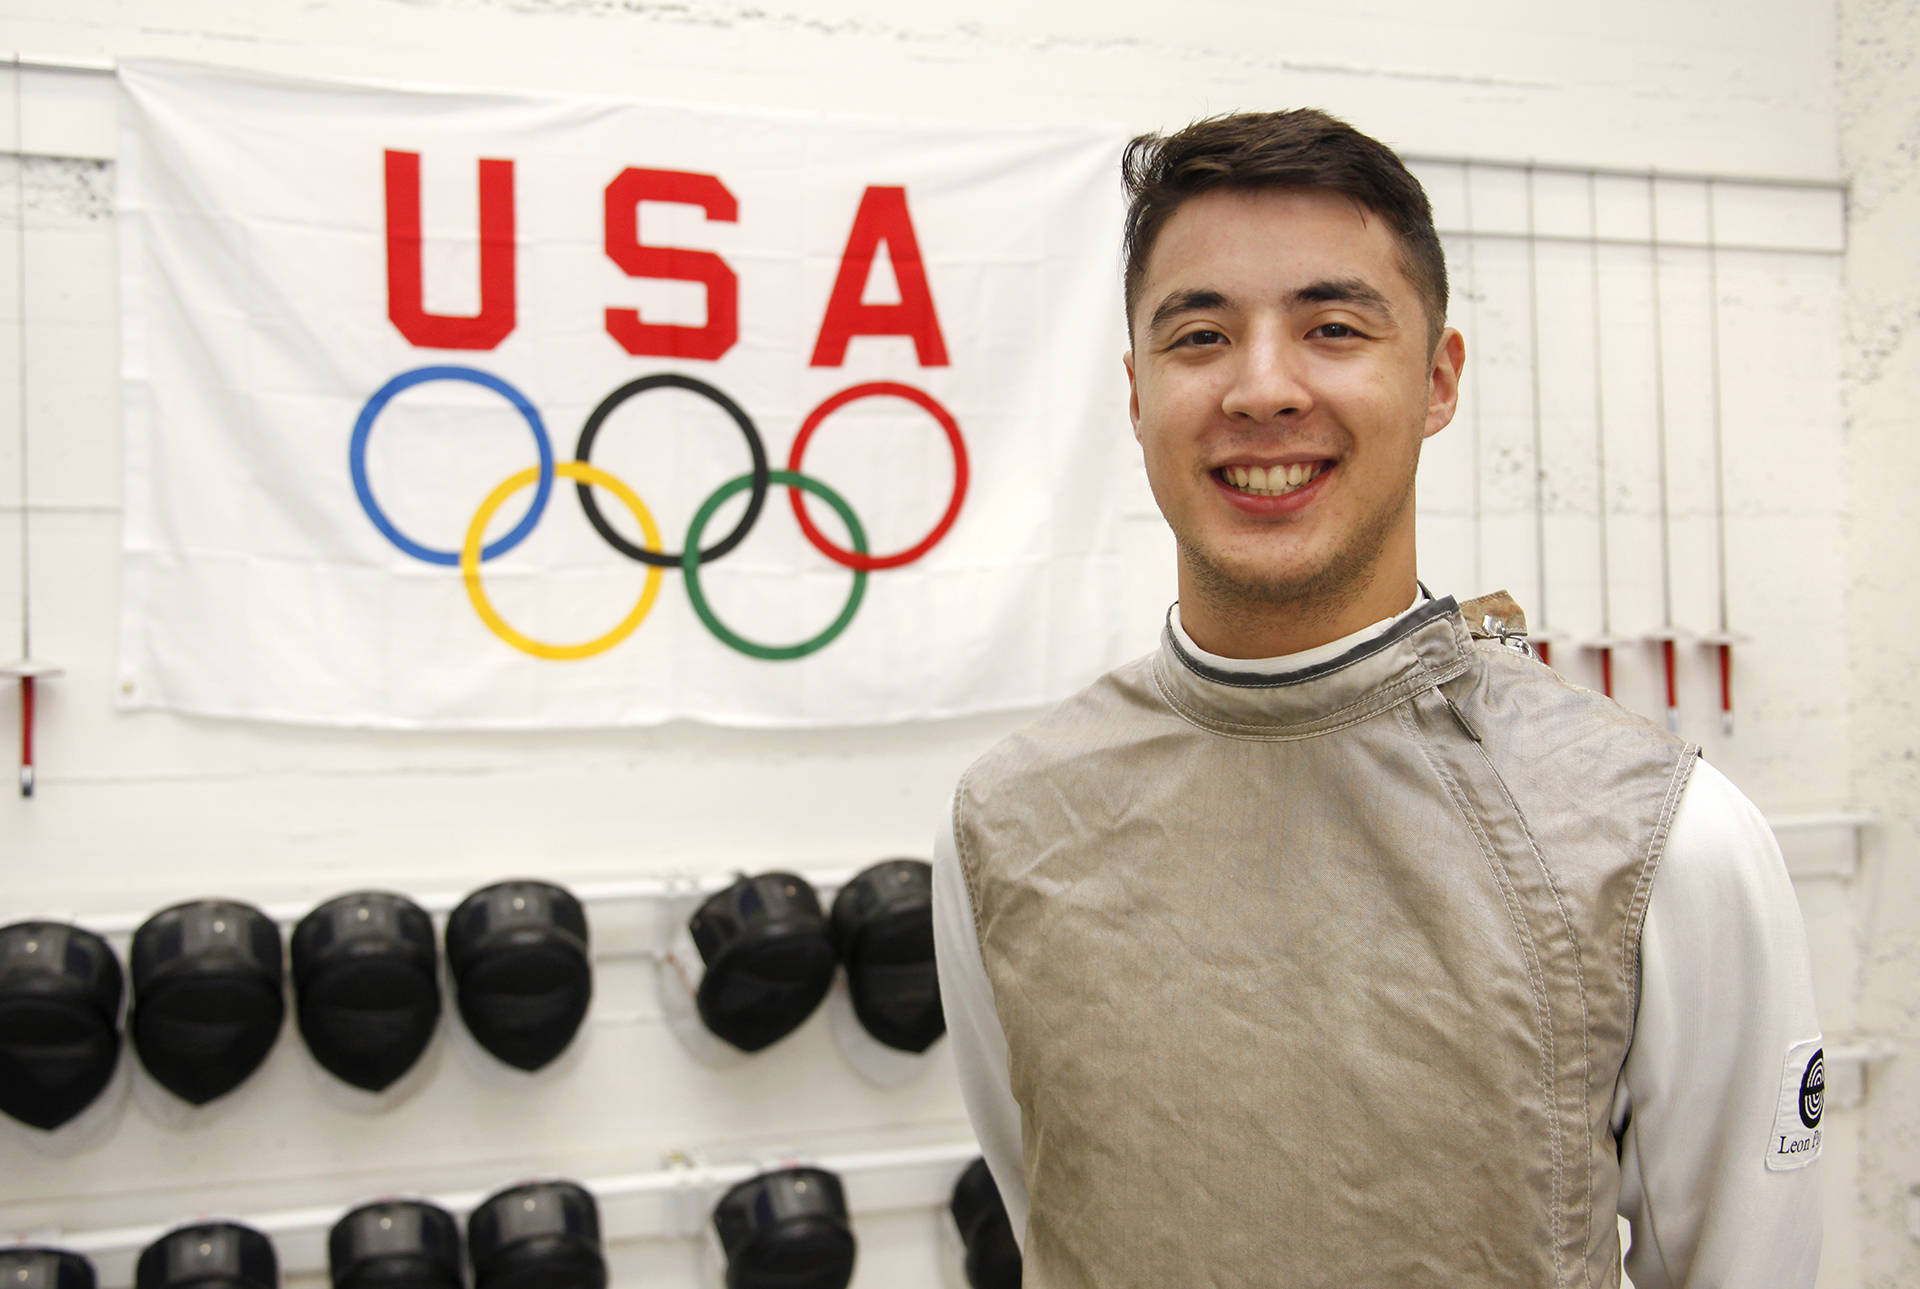 San Francisco Olympic Fencer Alexander Massialas Seeks Gold in Paris, Hopes to Cross Paths with Steph Curry